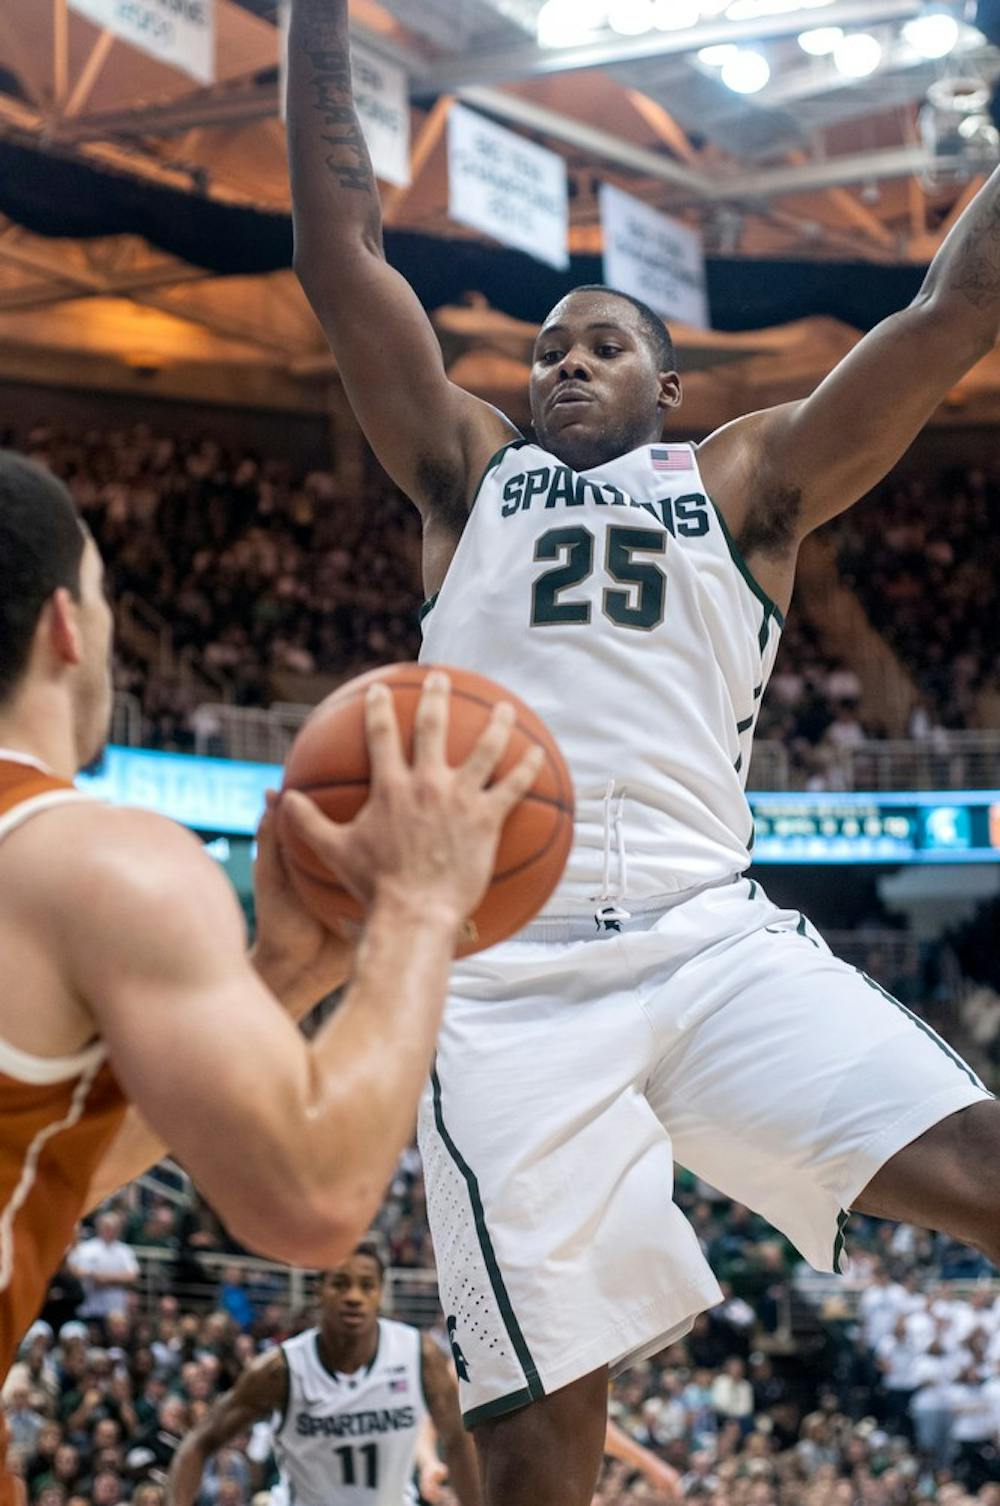 	<p>Senior center Derrick Nix attempts to block a Texas player on Dec. 22, 2012, at Breslin Center. Nix had a career high 25 points and 11 rebounds in the game, helping the Spartans beat the Longhorns 67-56. Natalie Kolb/The State News</p>